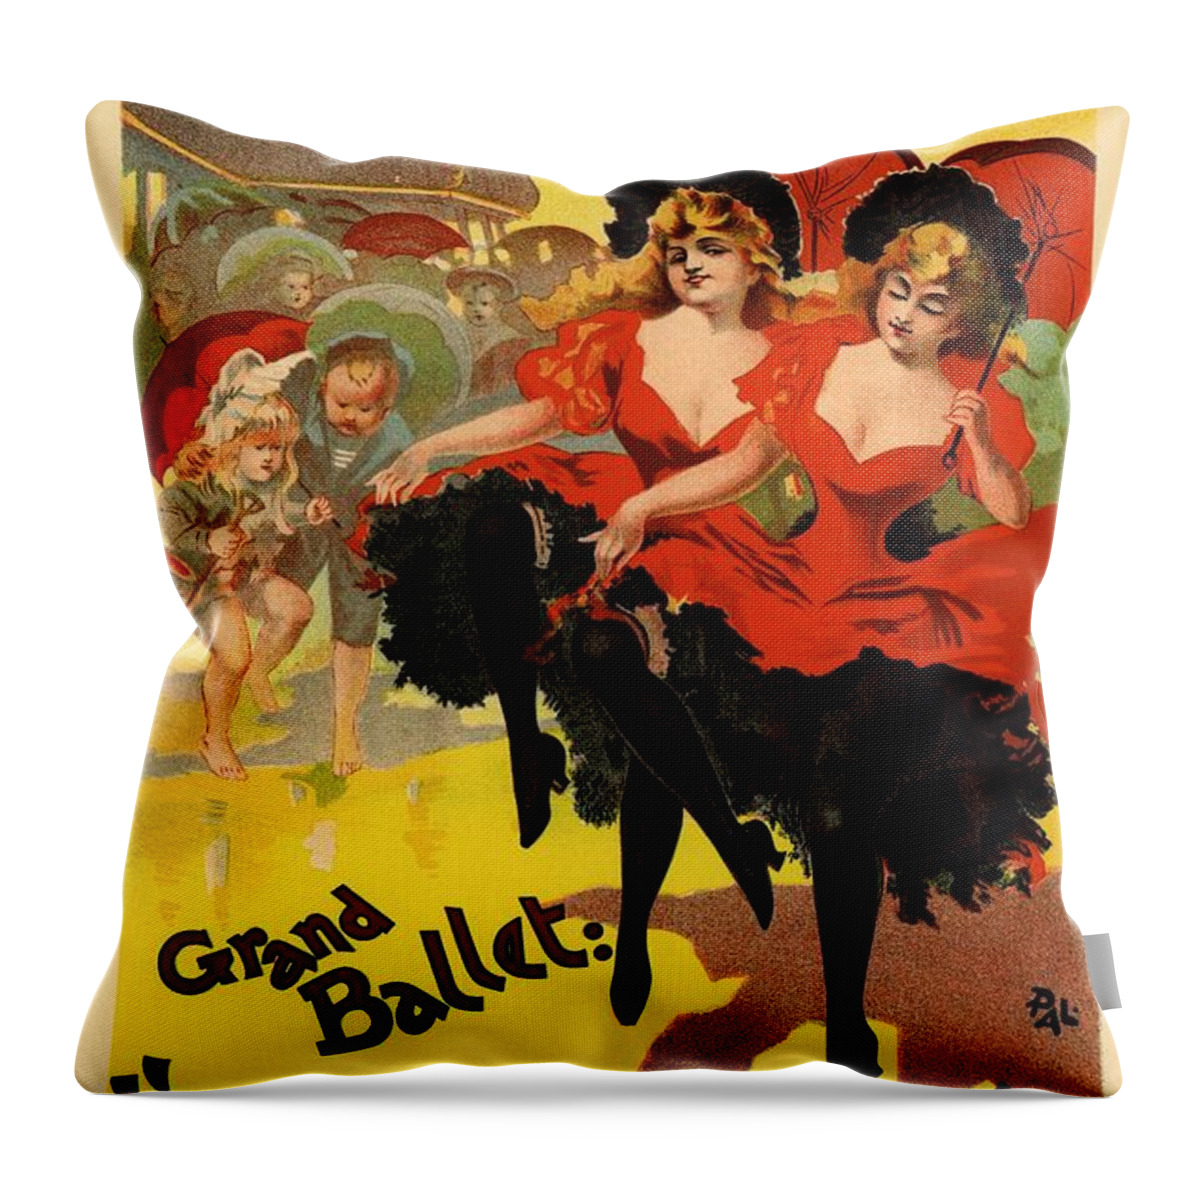 Poster Throw Pillow featuring the photograph Olympia Grand Ballet Brighton by Gianfranco Weiss